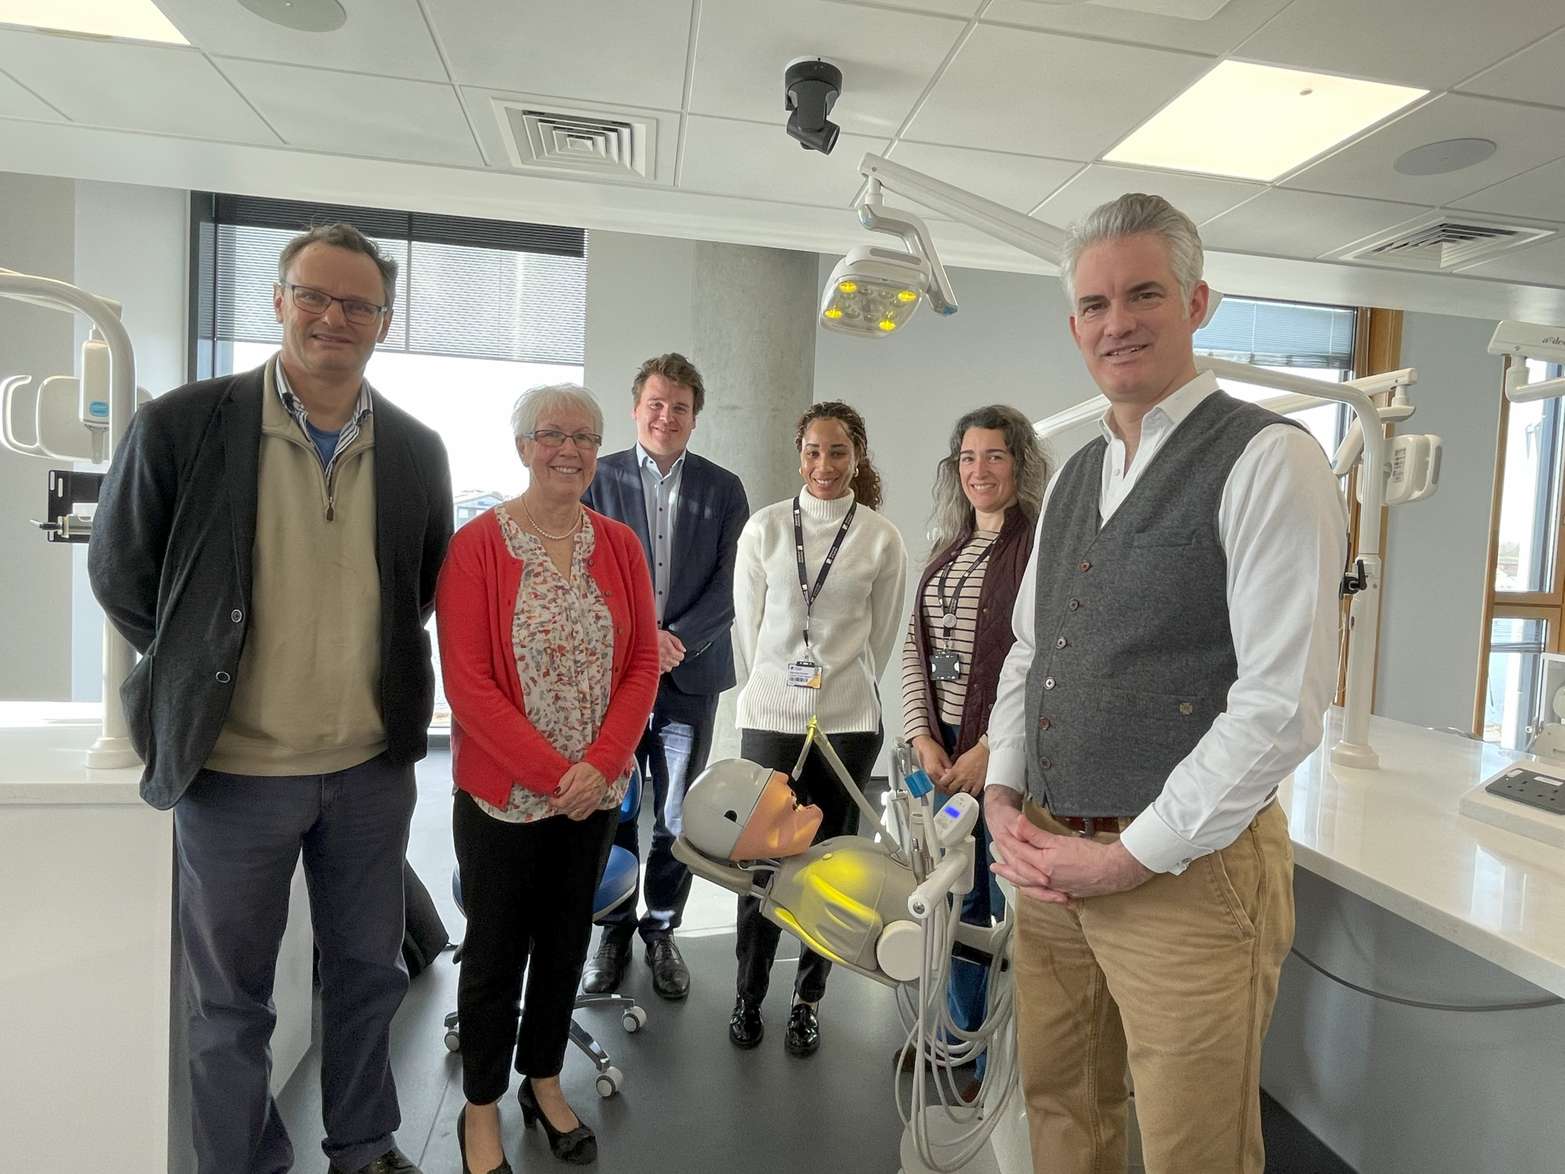 A photo of Suffolk MPs Peter Aldous, Tom Hunt and James Cartlidge with Vice Chancellor Helen Langton and dentistry lecturer Stacianne Tennant. The group are gathered around a dentistry mannequin in the labs